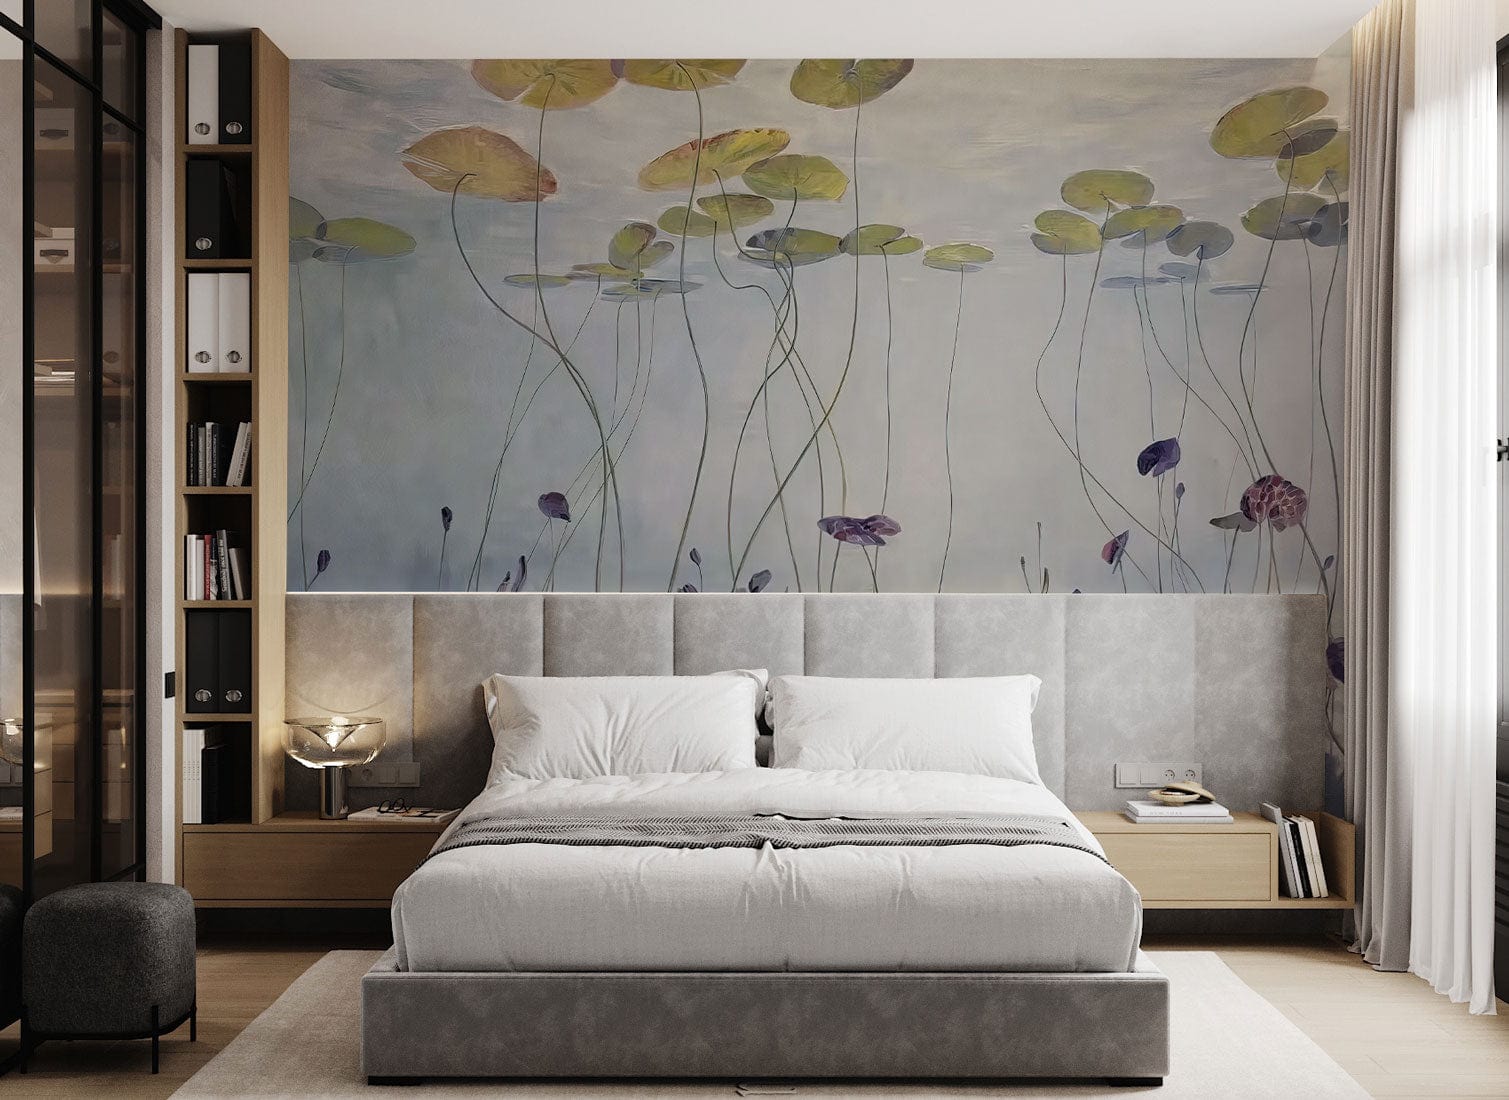 Wallpaper mural for bedroom decor featuring a water lily pool scene.